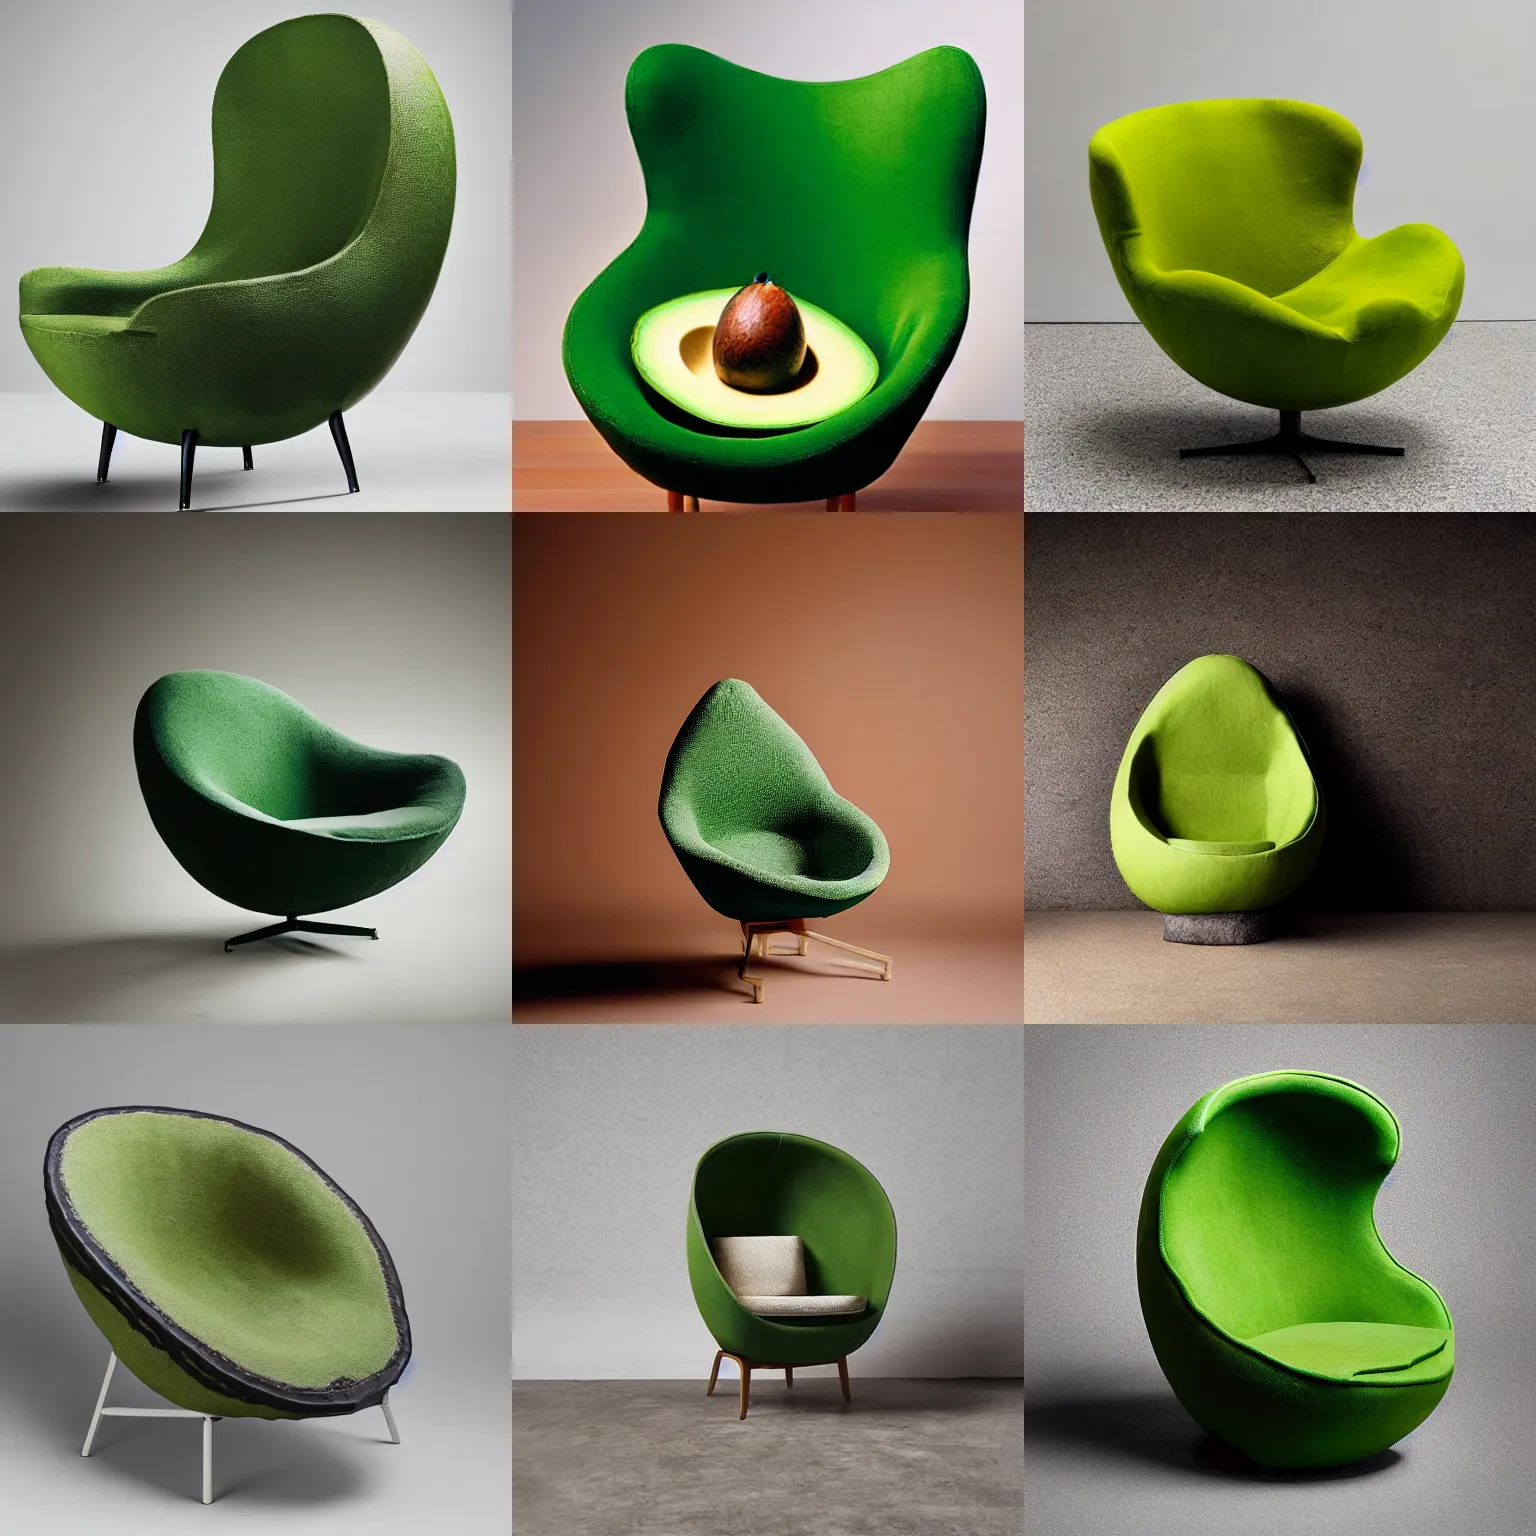 Prompt: An avocado armchair, designed to be extremely comfortable, while also looking like an avocado, photograph, studio lighting, advertising photography, magazine quality